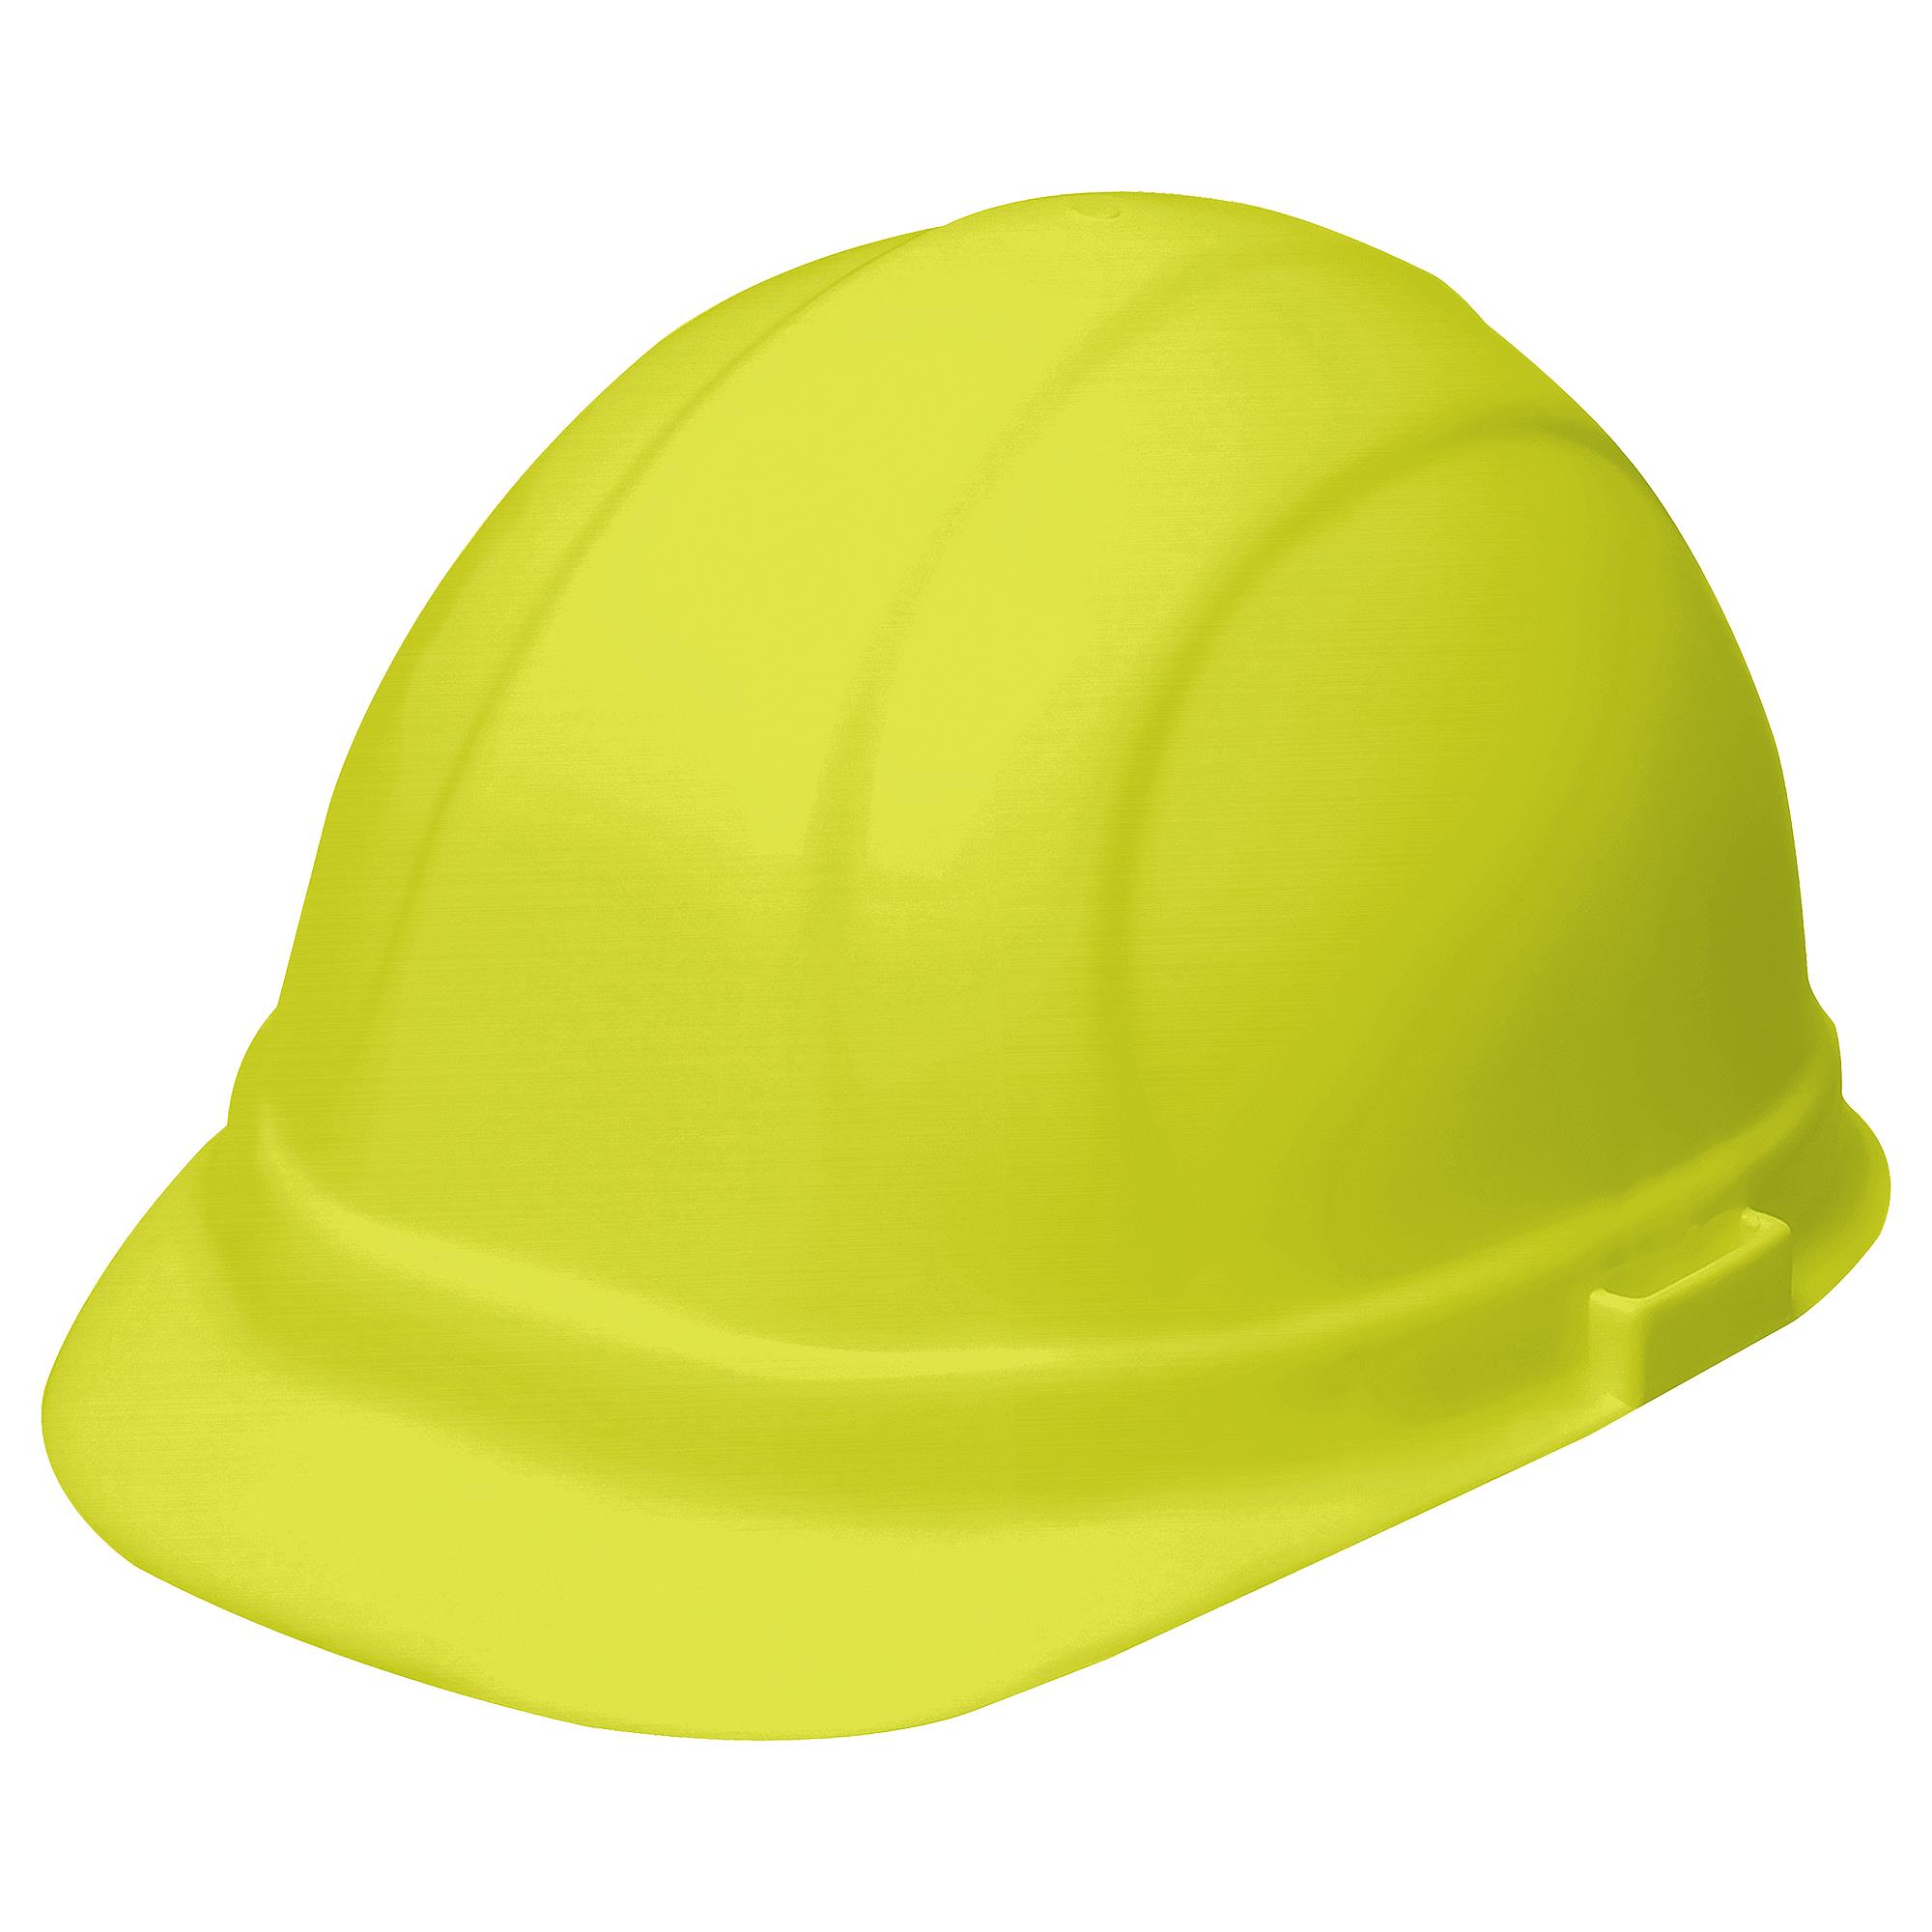 ERB Omega II Cap Style Hard Hat from Columbia Safety